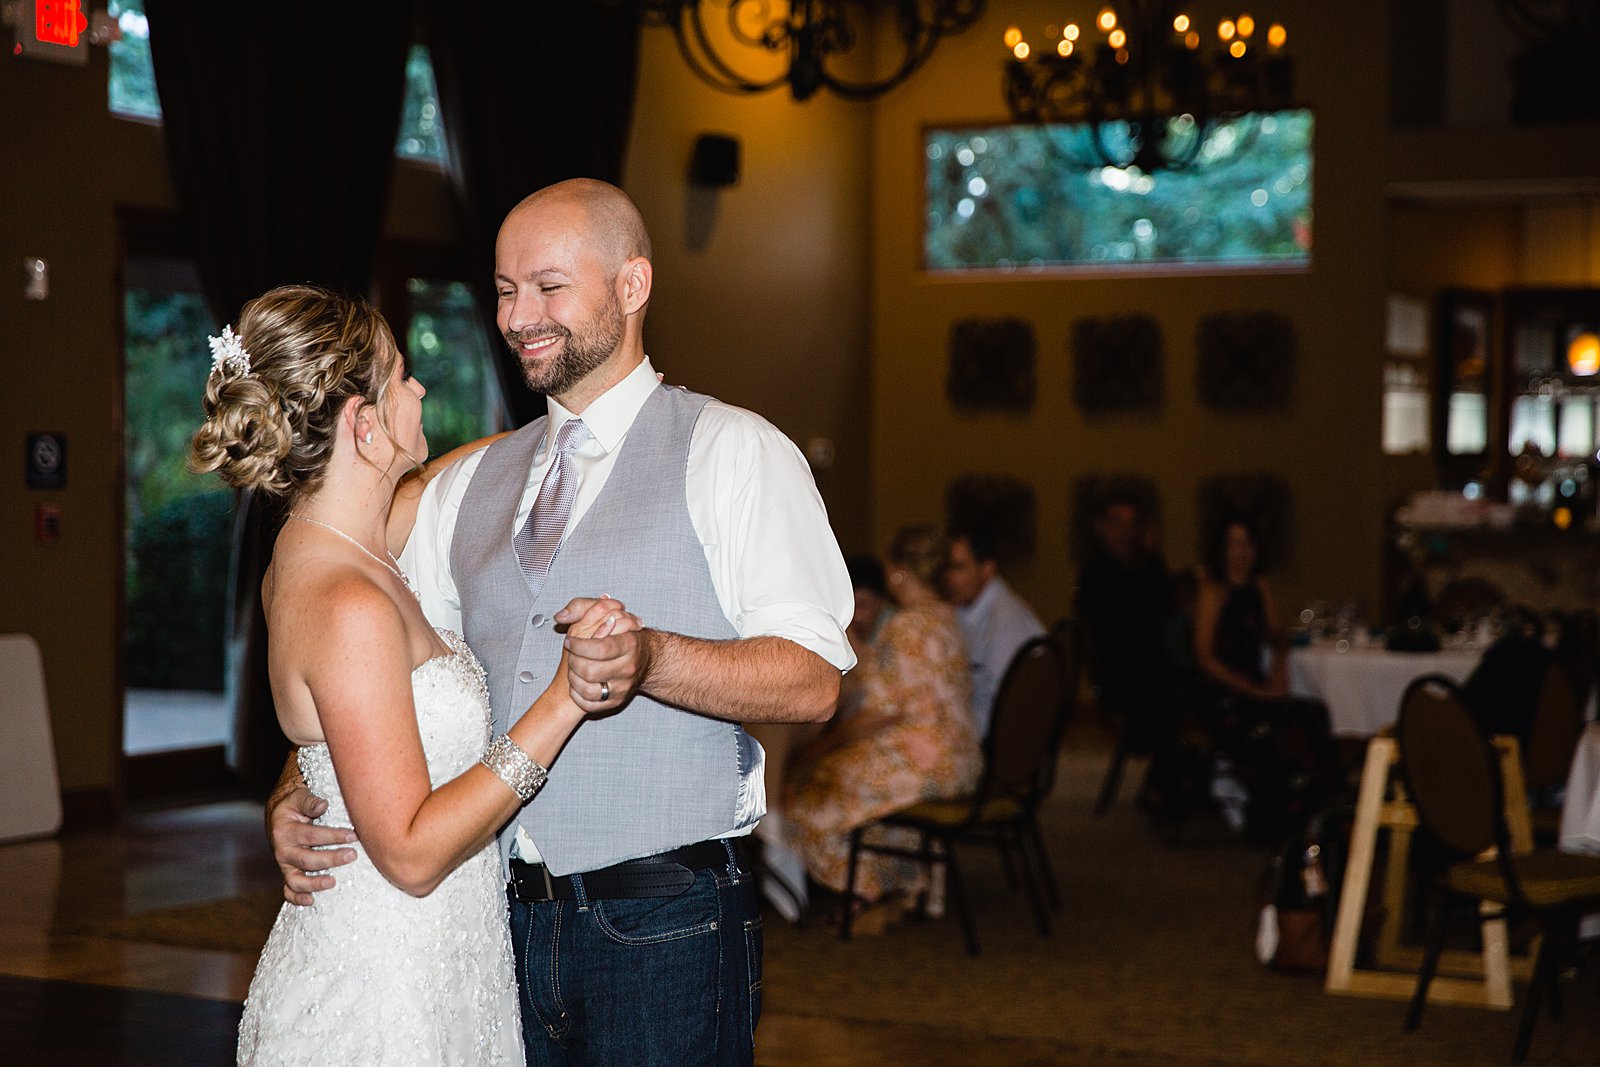 Bride and Groom sharing first dance at their The Windmill House wedding reception by Arizona wedding photographer PMA Photography.